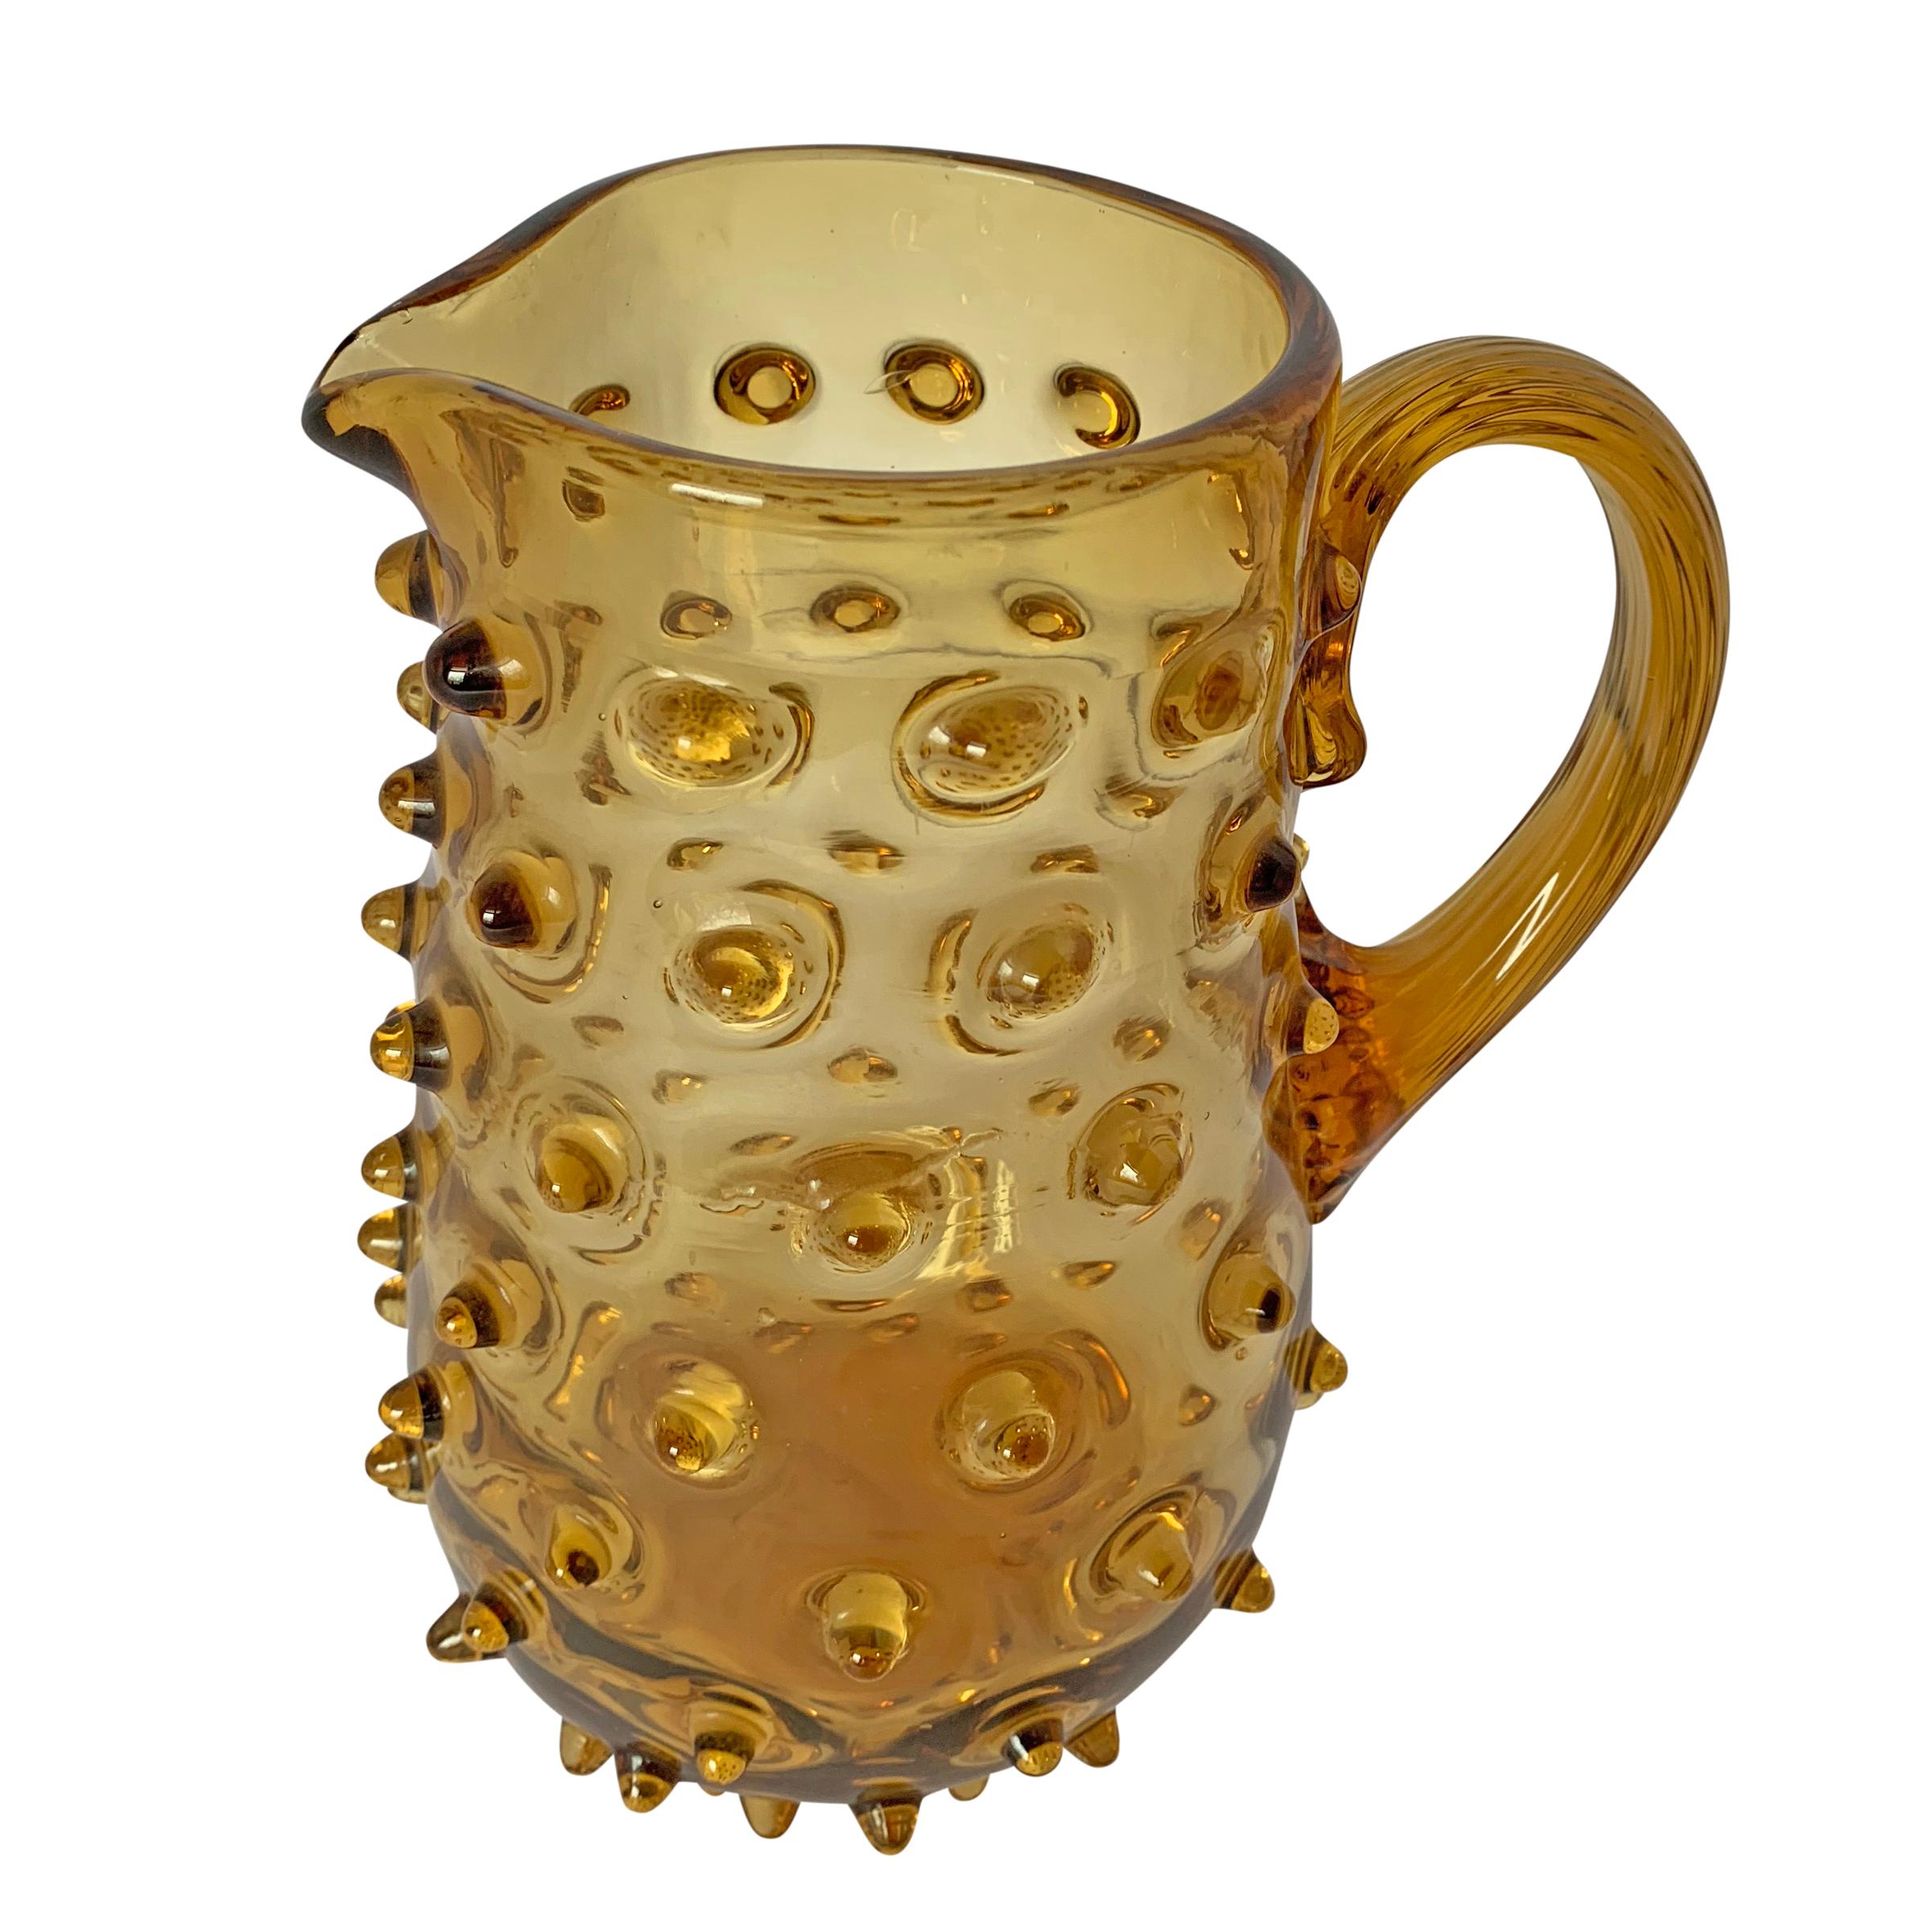 A fanciful early 20th century American amber glass pitcher covered in spiky hobnails with a pulled and applied handle. This pitcher also makes a beautiful flower vase.